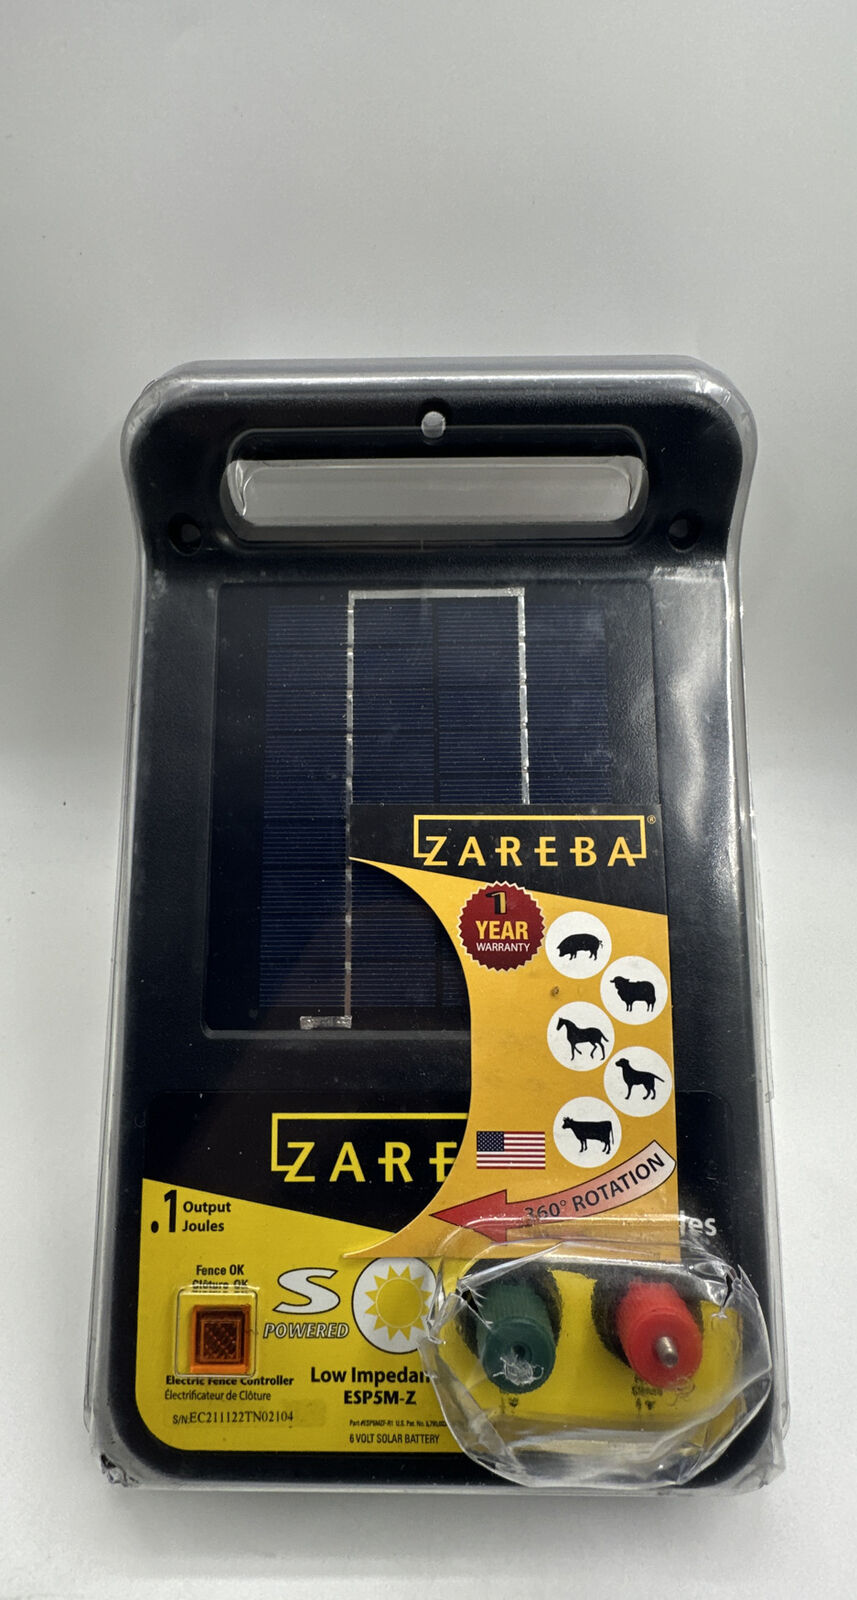 Zareba ESP5M-Z Solar Powered Low Impedance Electric Fence Charger - 5 Mile Solar